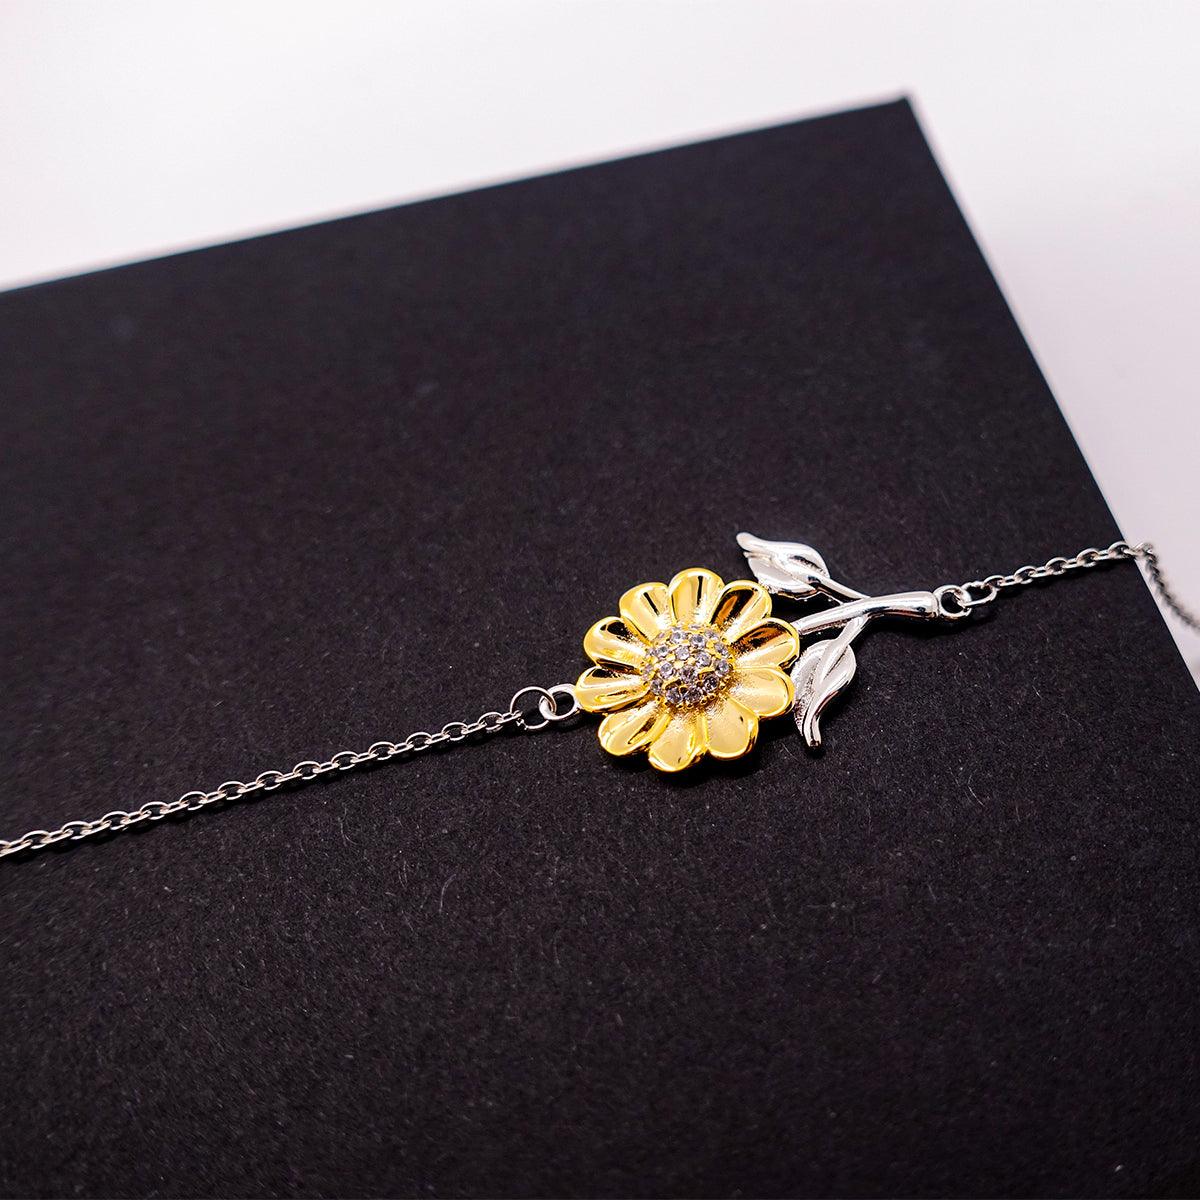 Police Officer Sunflower Bracelet - Thanks for being who you are - Birthday Christmas Jewelry Gifts Coworkers Colleague Boss - Mallard Moon Gift Shop